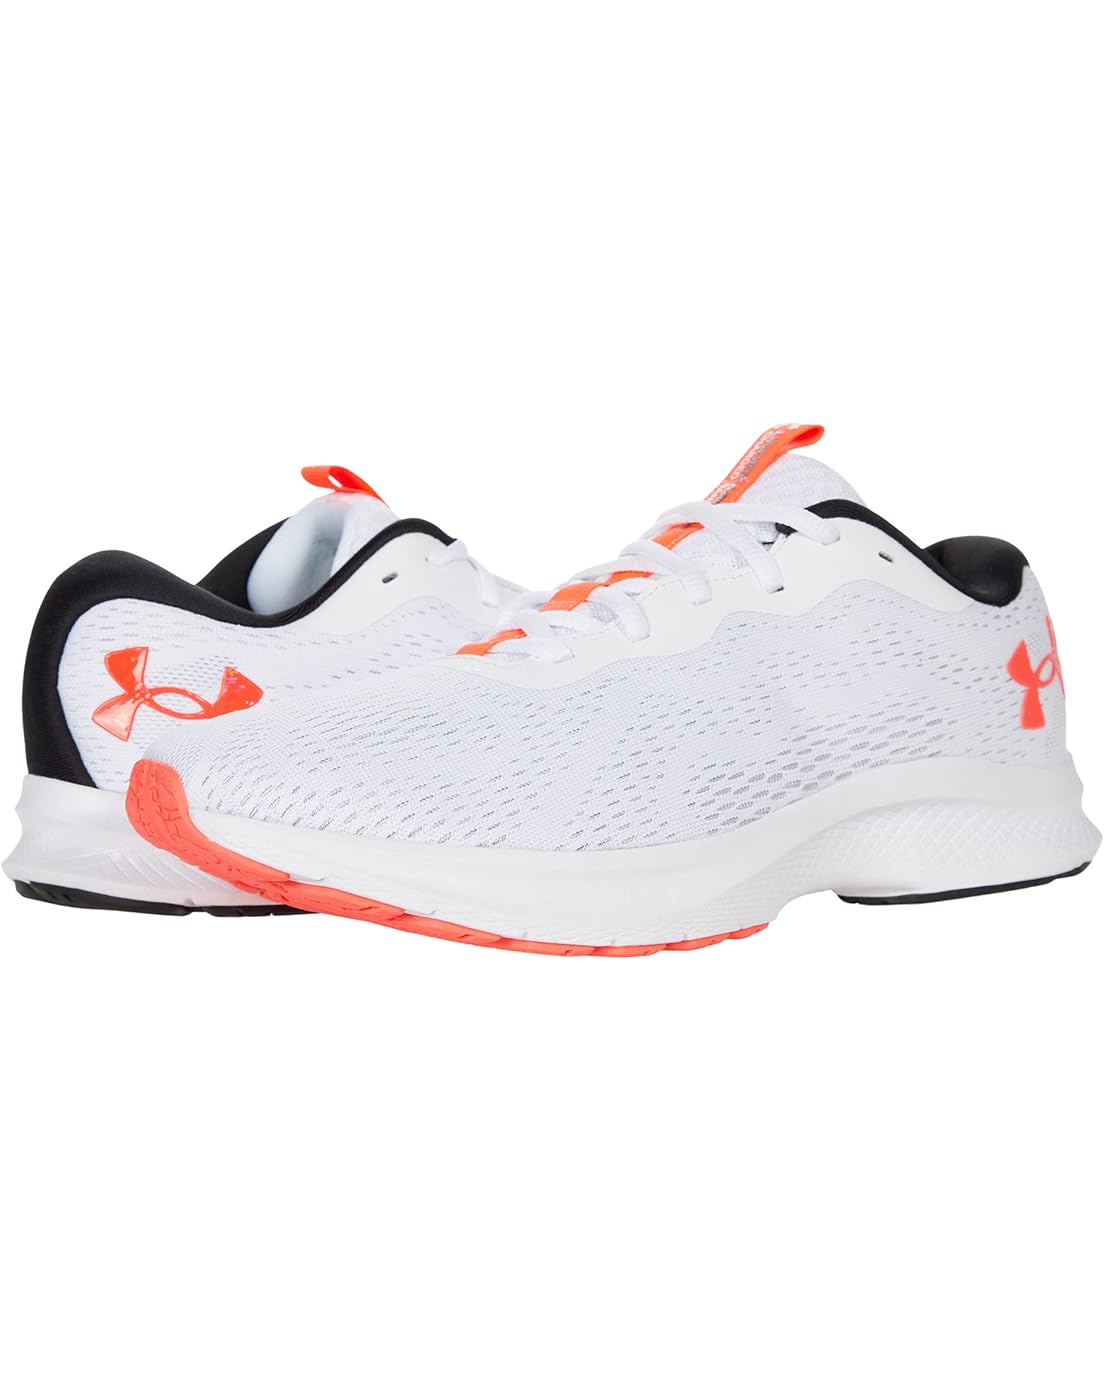 Under Armour Charged Bandit 7